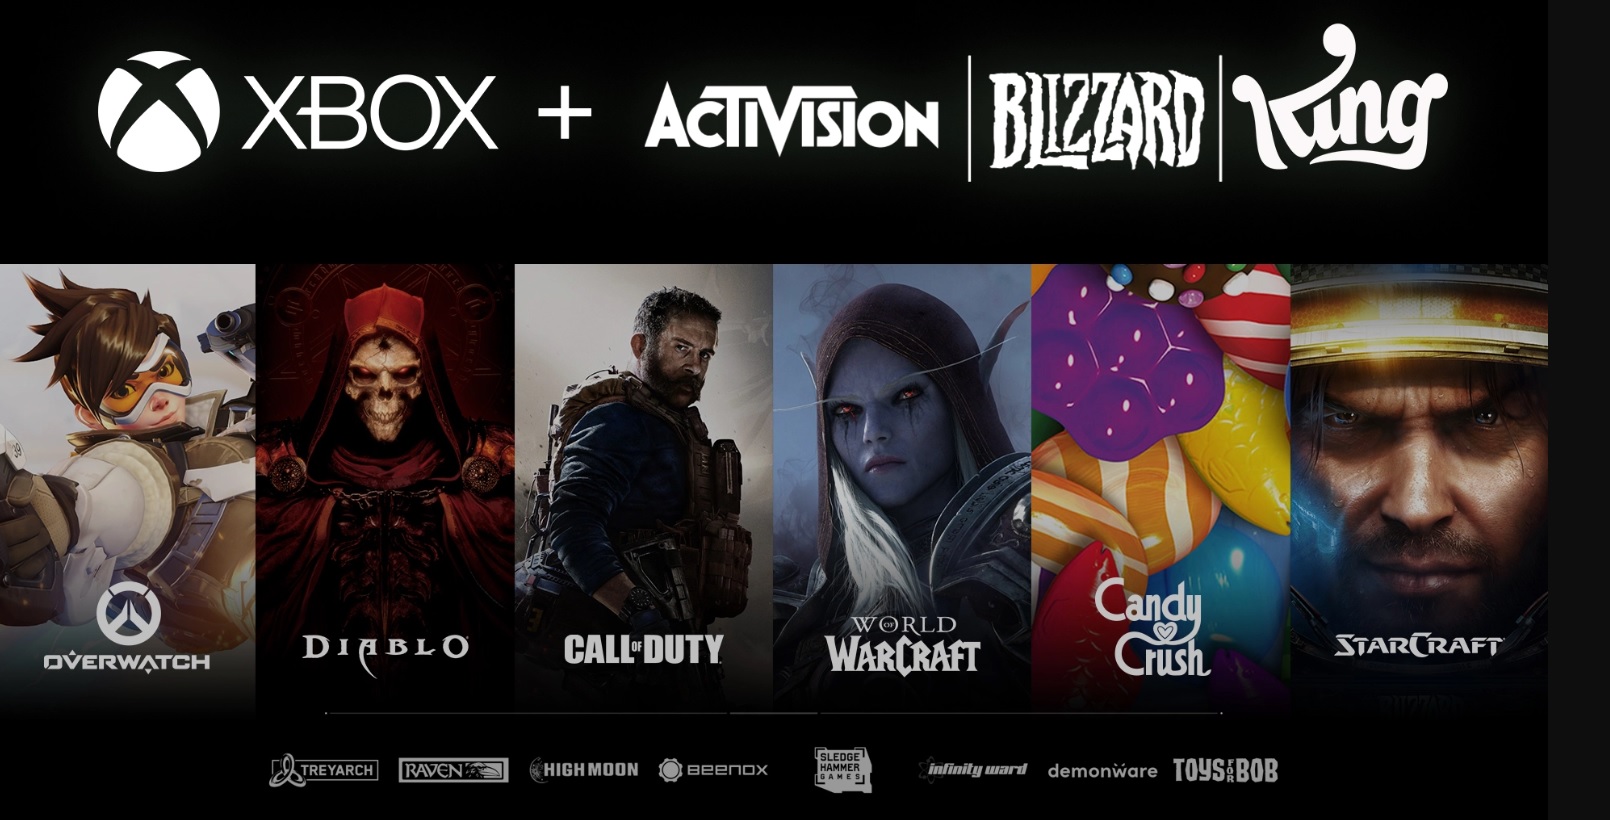 EU approved Activision deal